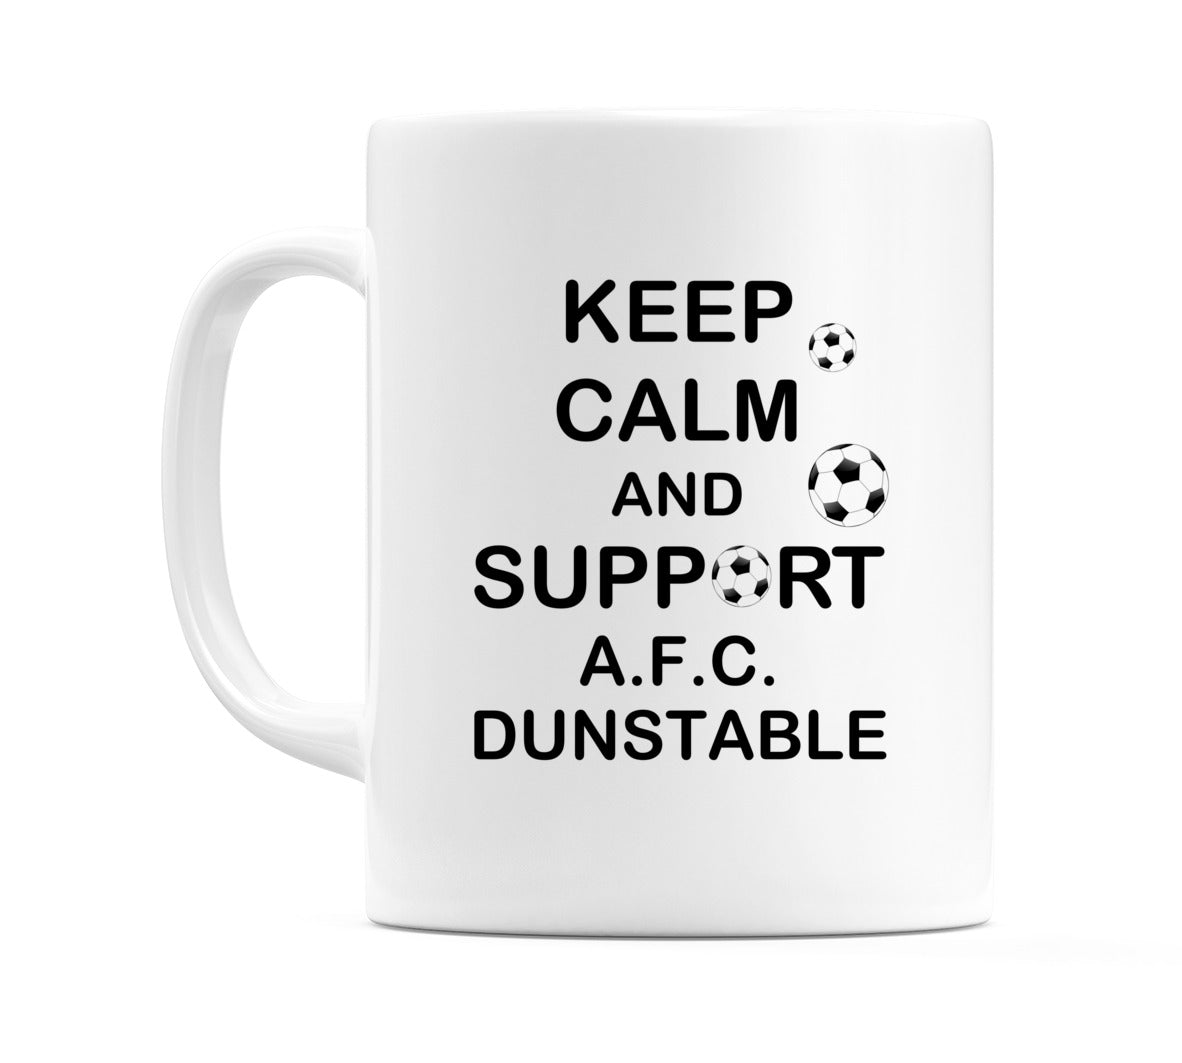 Keep Calm And Support A.F.C. Dunstable Mug